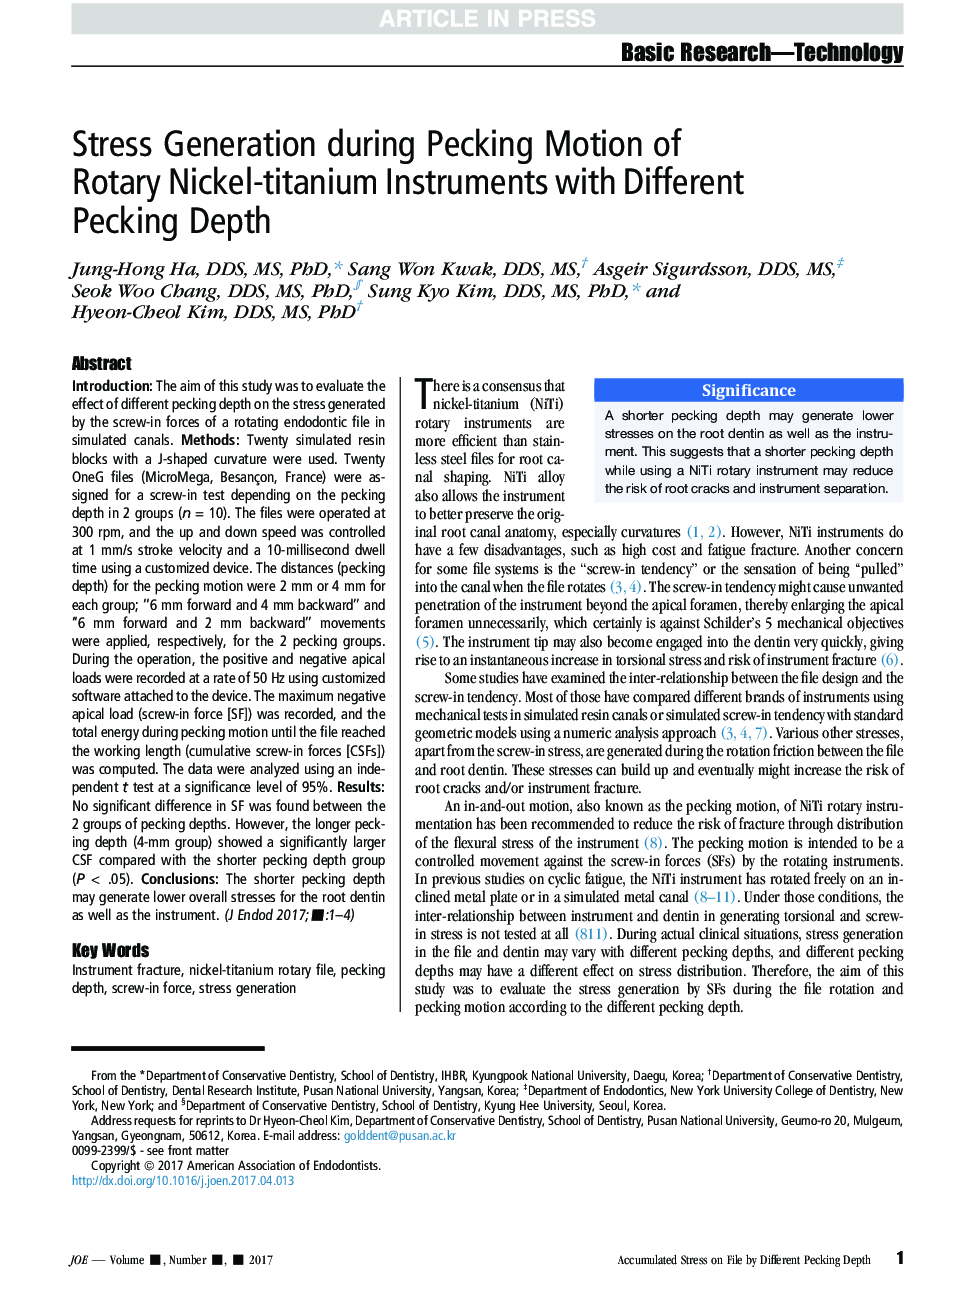 Stress Generation during Pecking Motion of Rotary Nickel-titanium Instruments with Different Pecking Depth